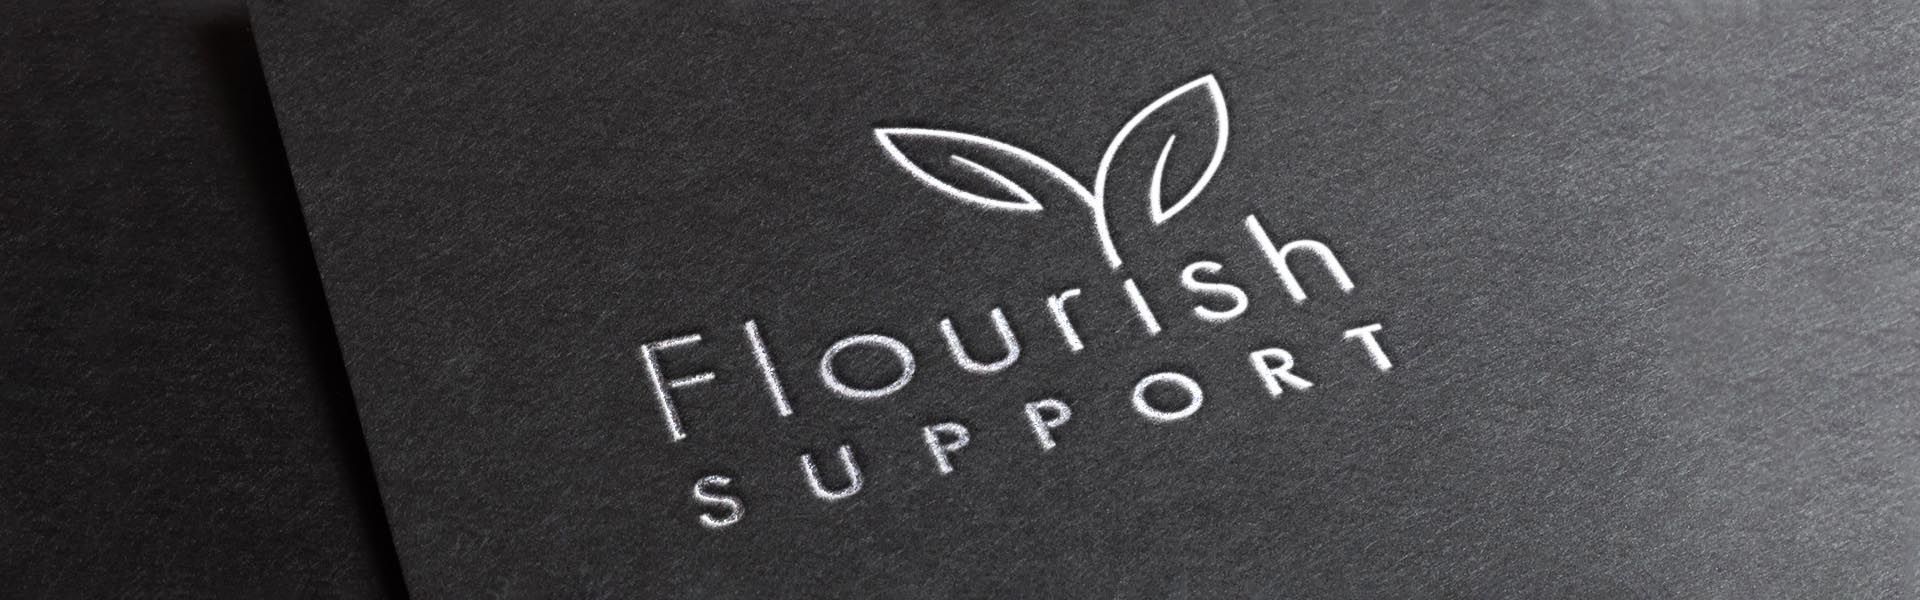 flourish support is written on a black piece of paper